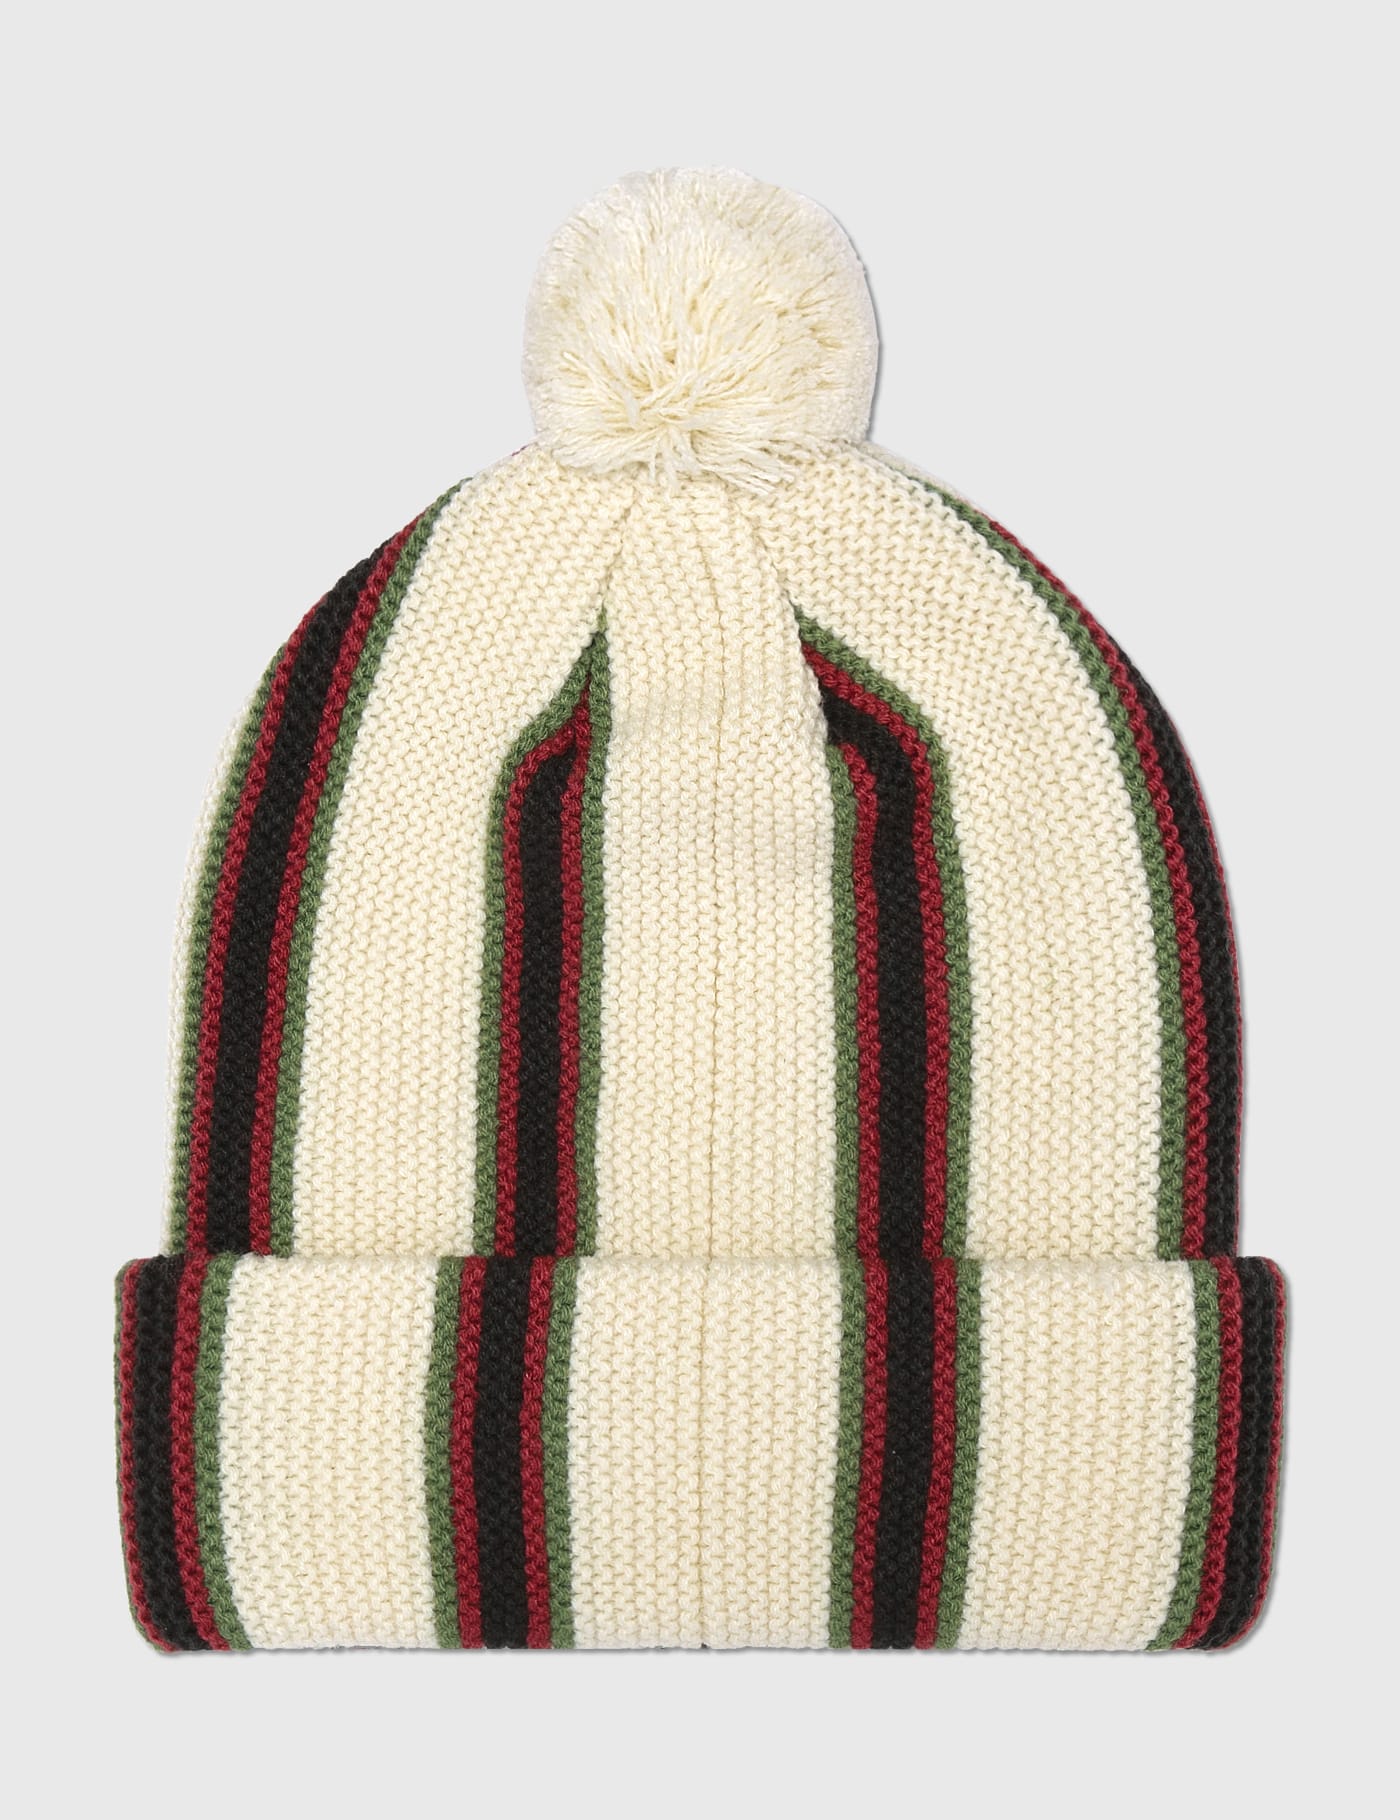 Stussy - Striped Pom Beanie | HBX - Globally Curated Fashion and Lifestyle  by Hypebeast